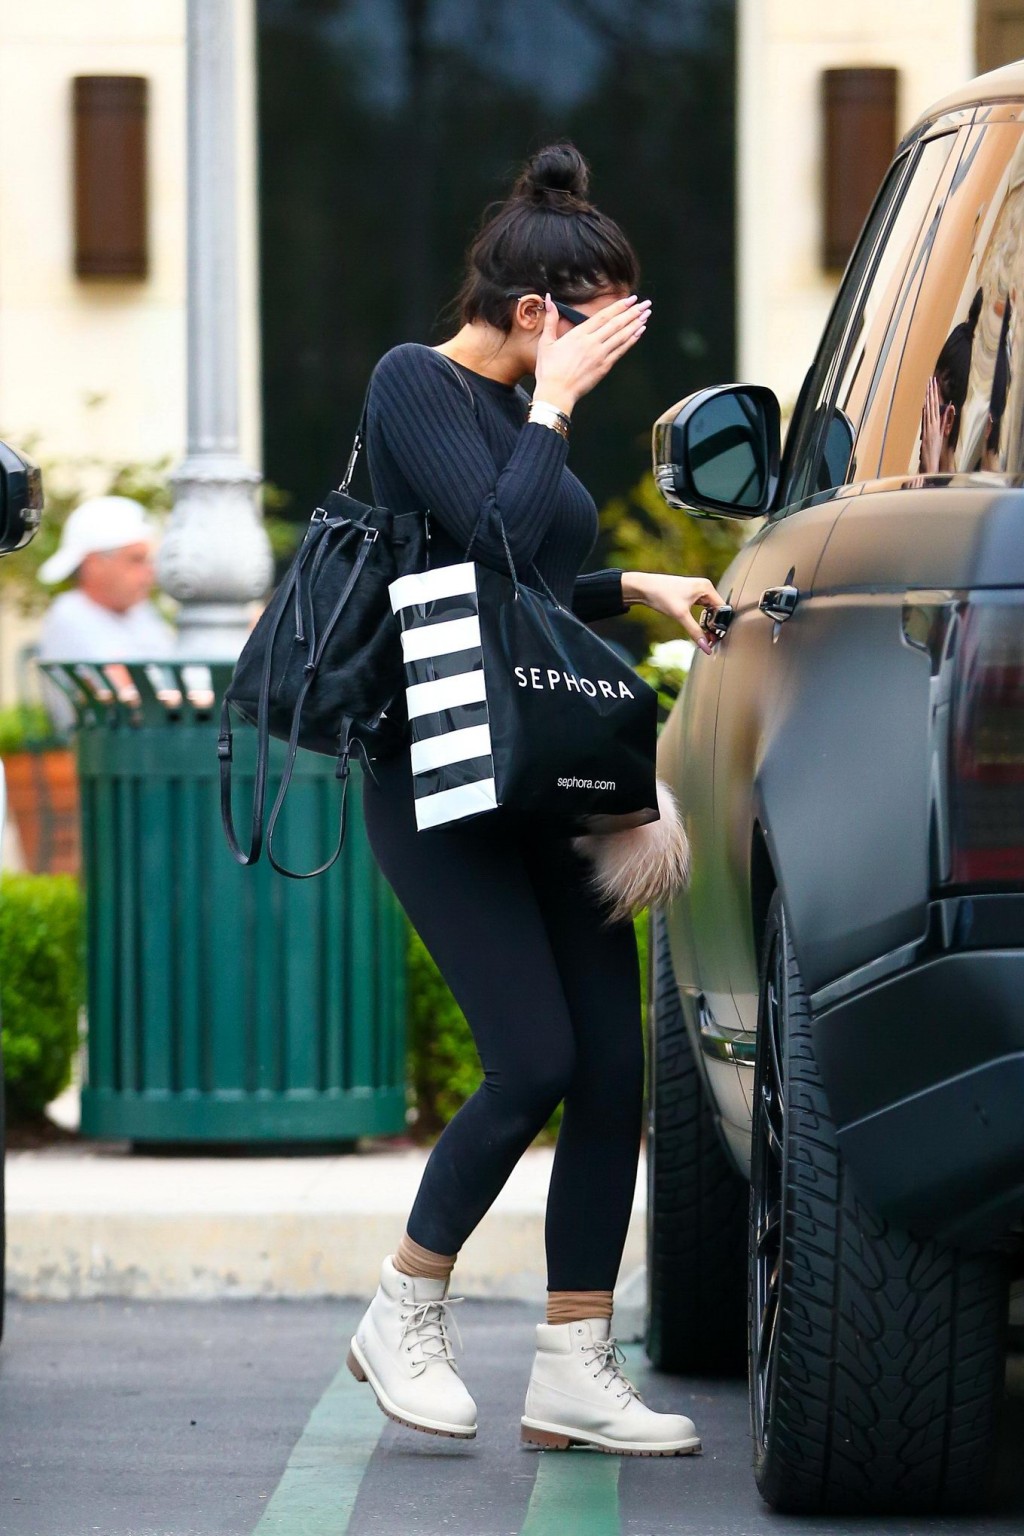 Kylie Jenner mostra il suo culo in collant mentre lo shopping a Sephora in Calabasas
 #75169740